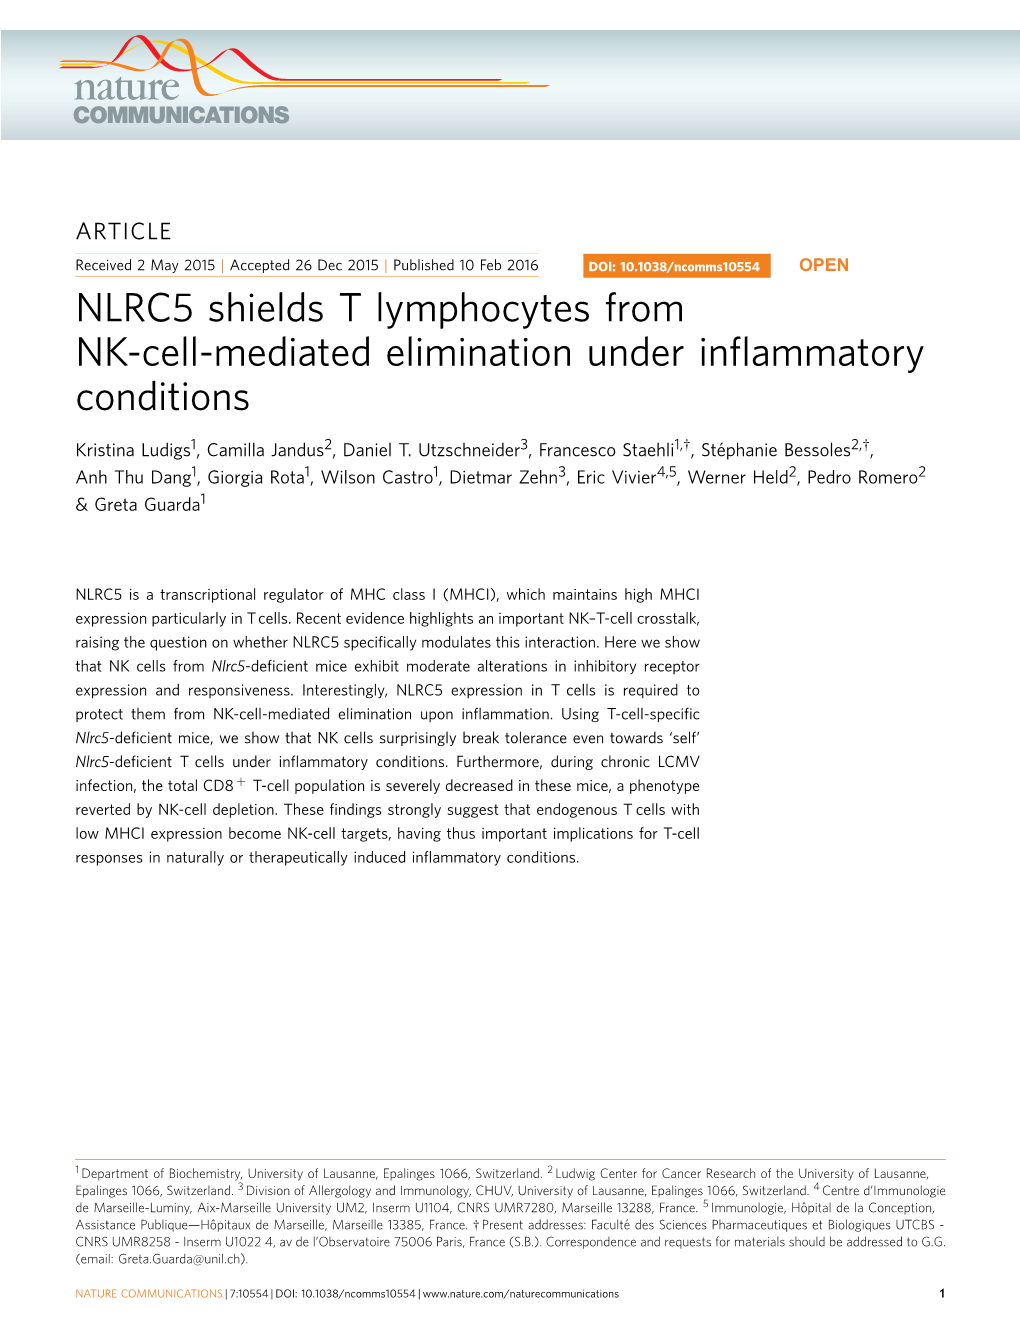 NLRC5 Shields T Lymphocytes from NK-Cell-Mediated Elimination Under Infiammatory Conditions